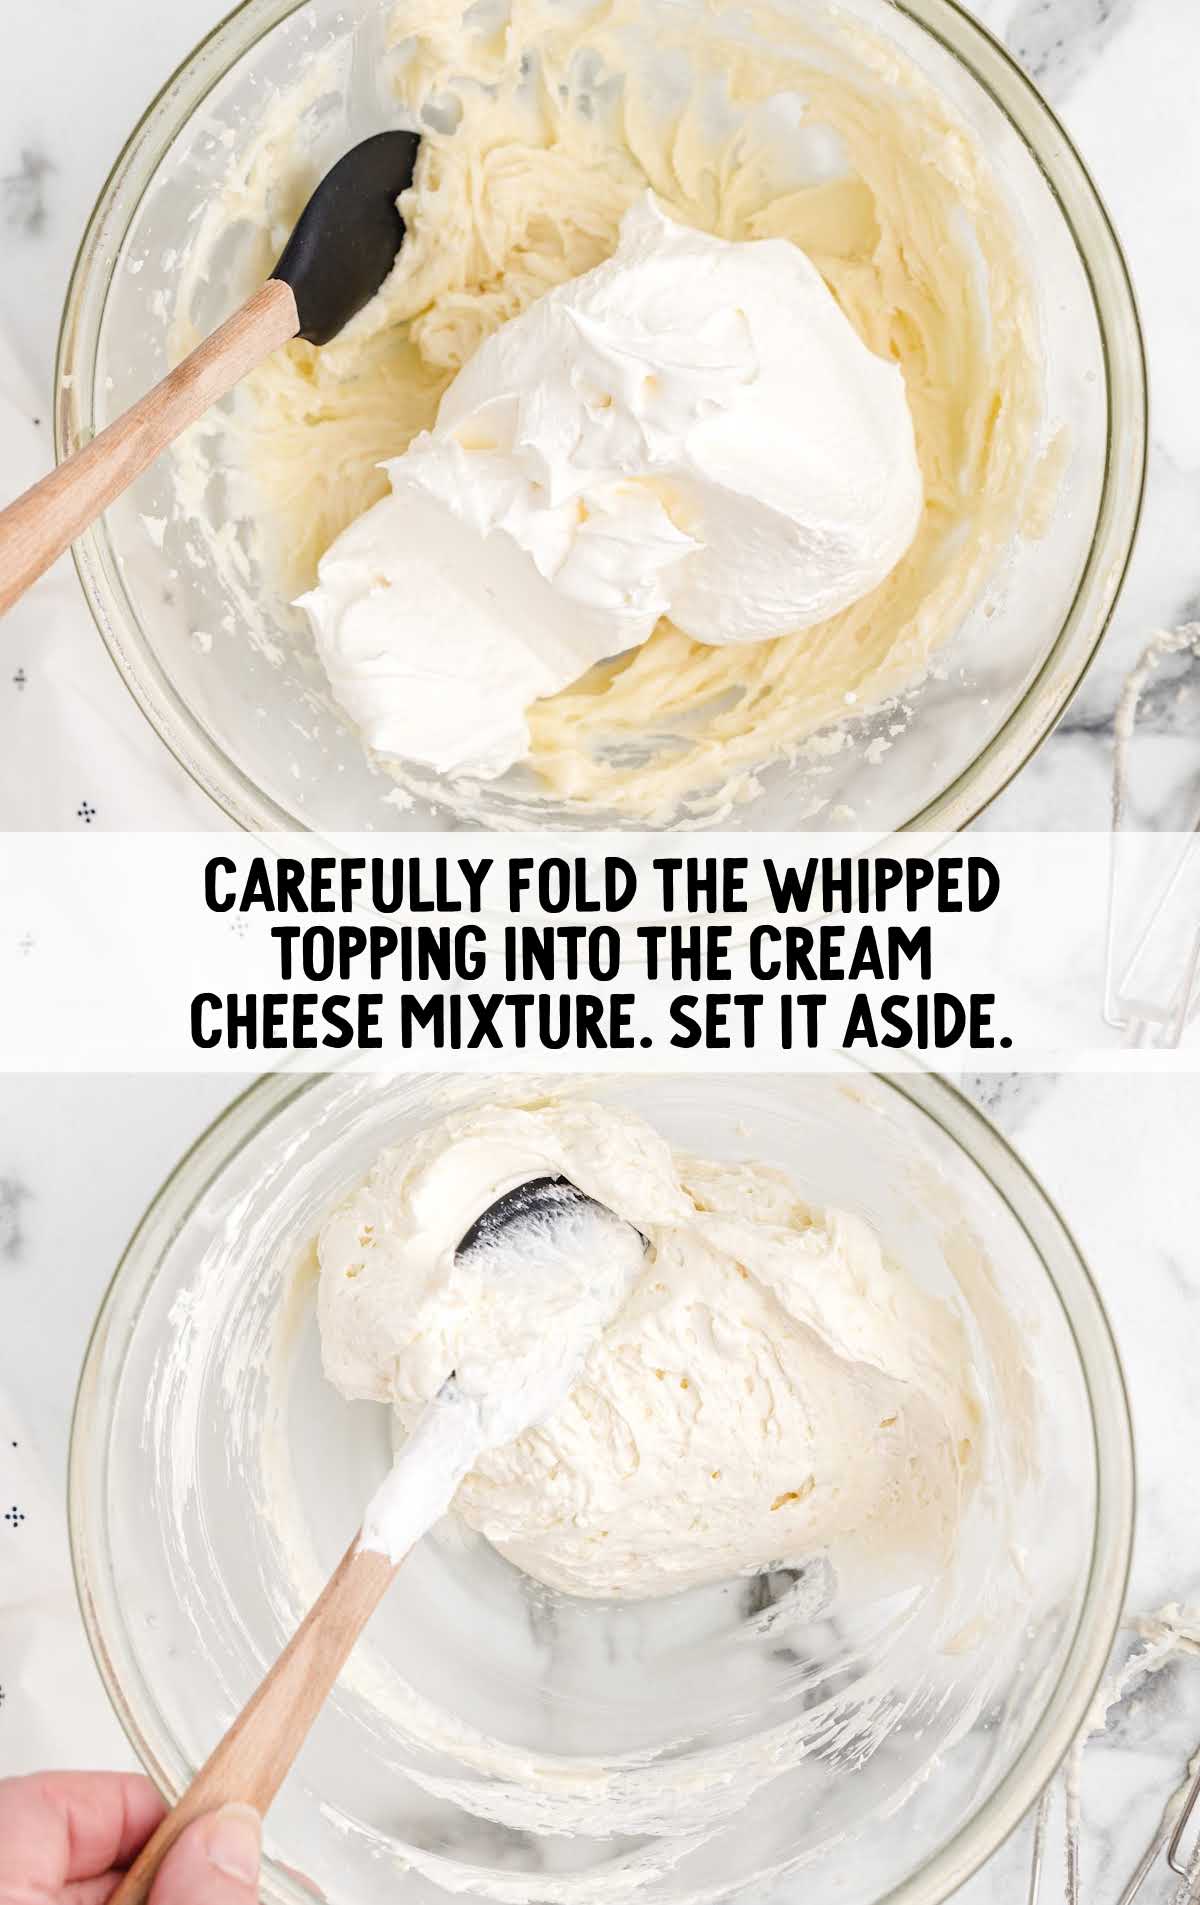 whipping cream folded into the cream cheese mixture